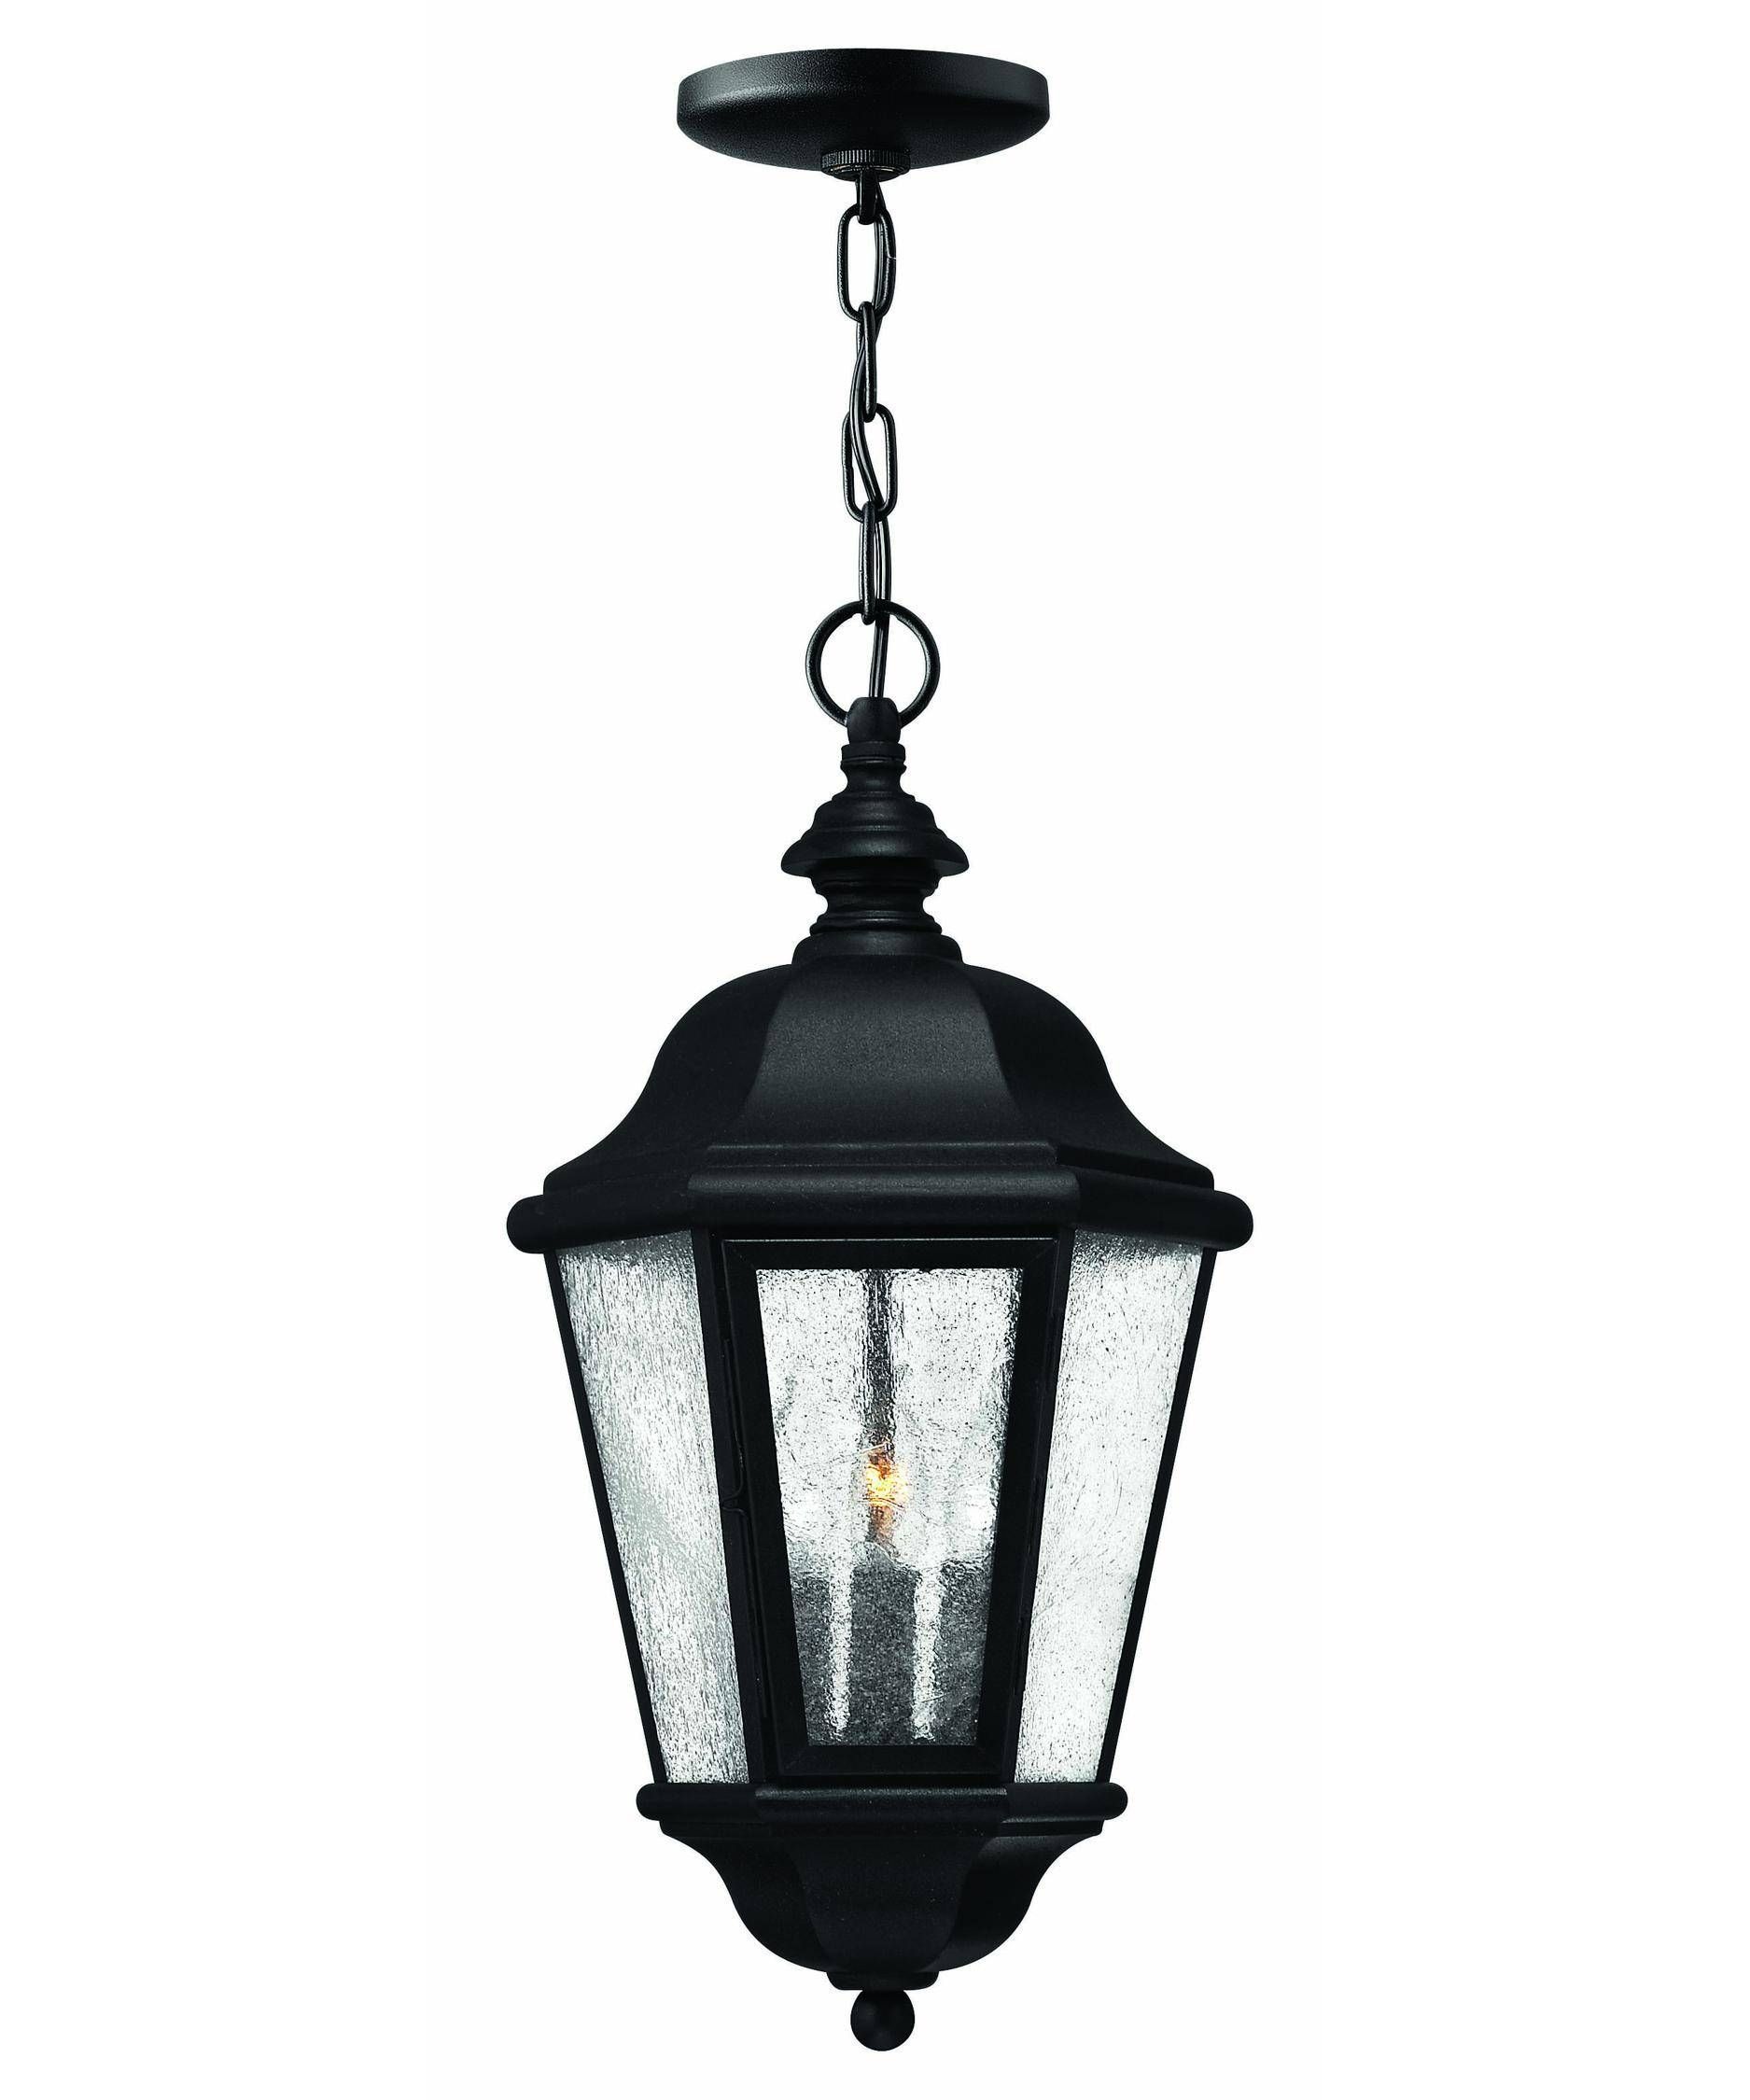 Hinkley Lighting 1672 Edgewater 10 Inch Wide 3 Light Outdoor Throughout Exterior Pendant Light Fixtures (View 8 of 15)